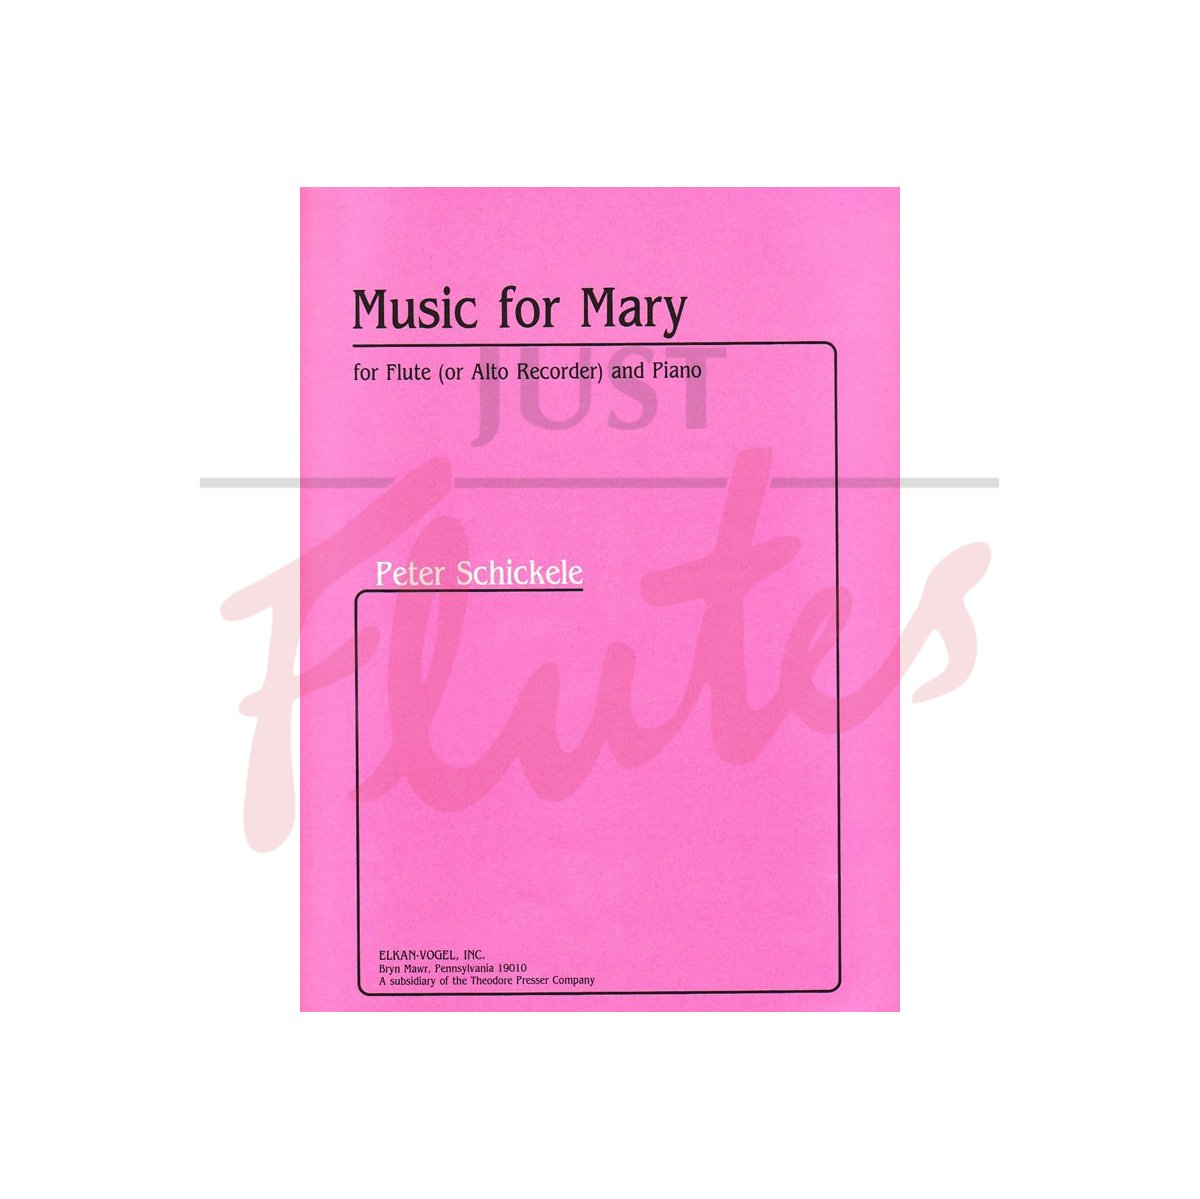 Music for Mary for Flute (or treble recorder) and Piano